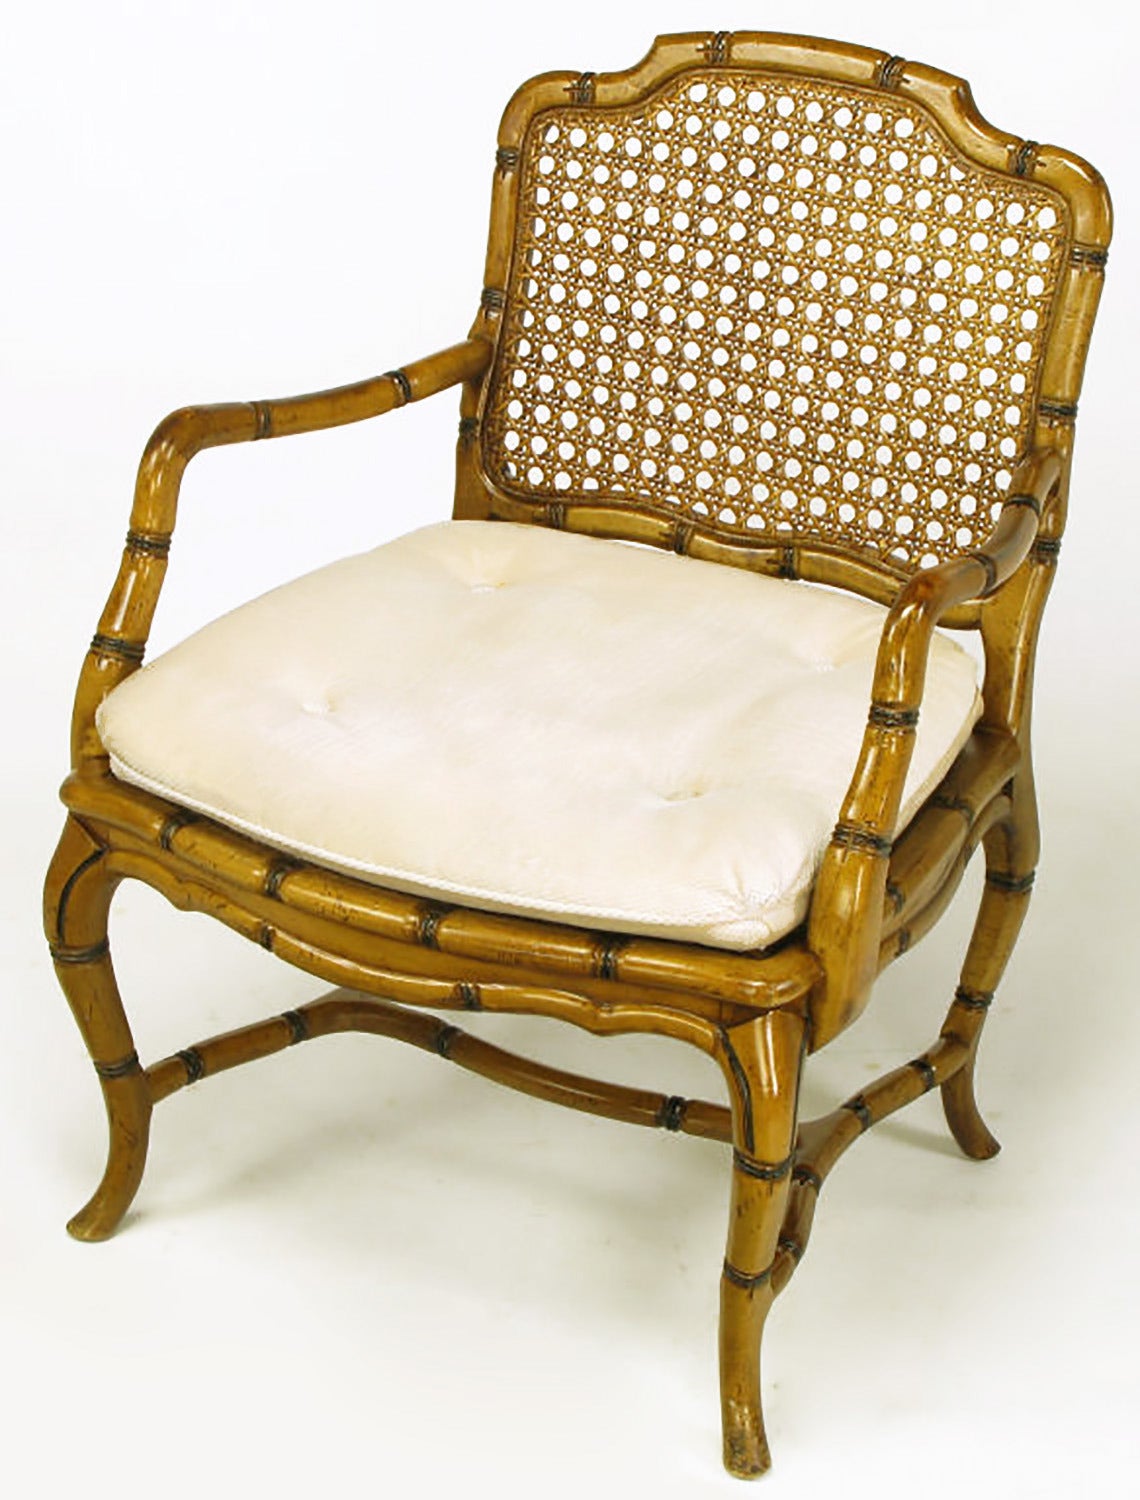 American Bamboo-Form Cabriole Leg Cane Back Armchair For Sale